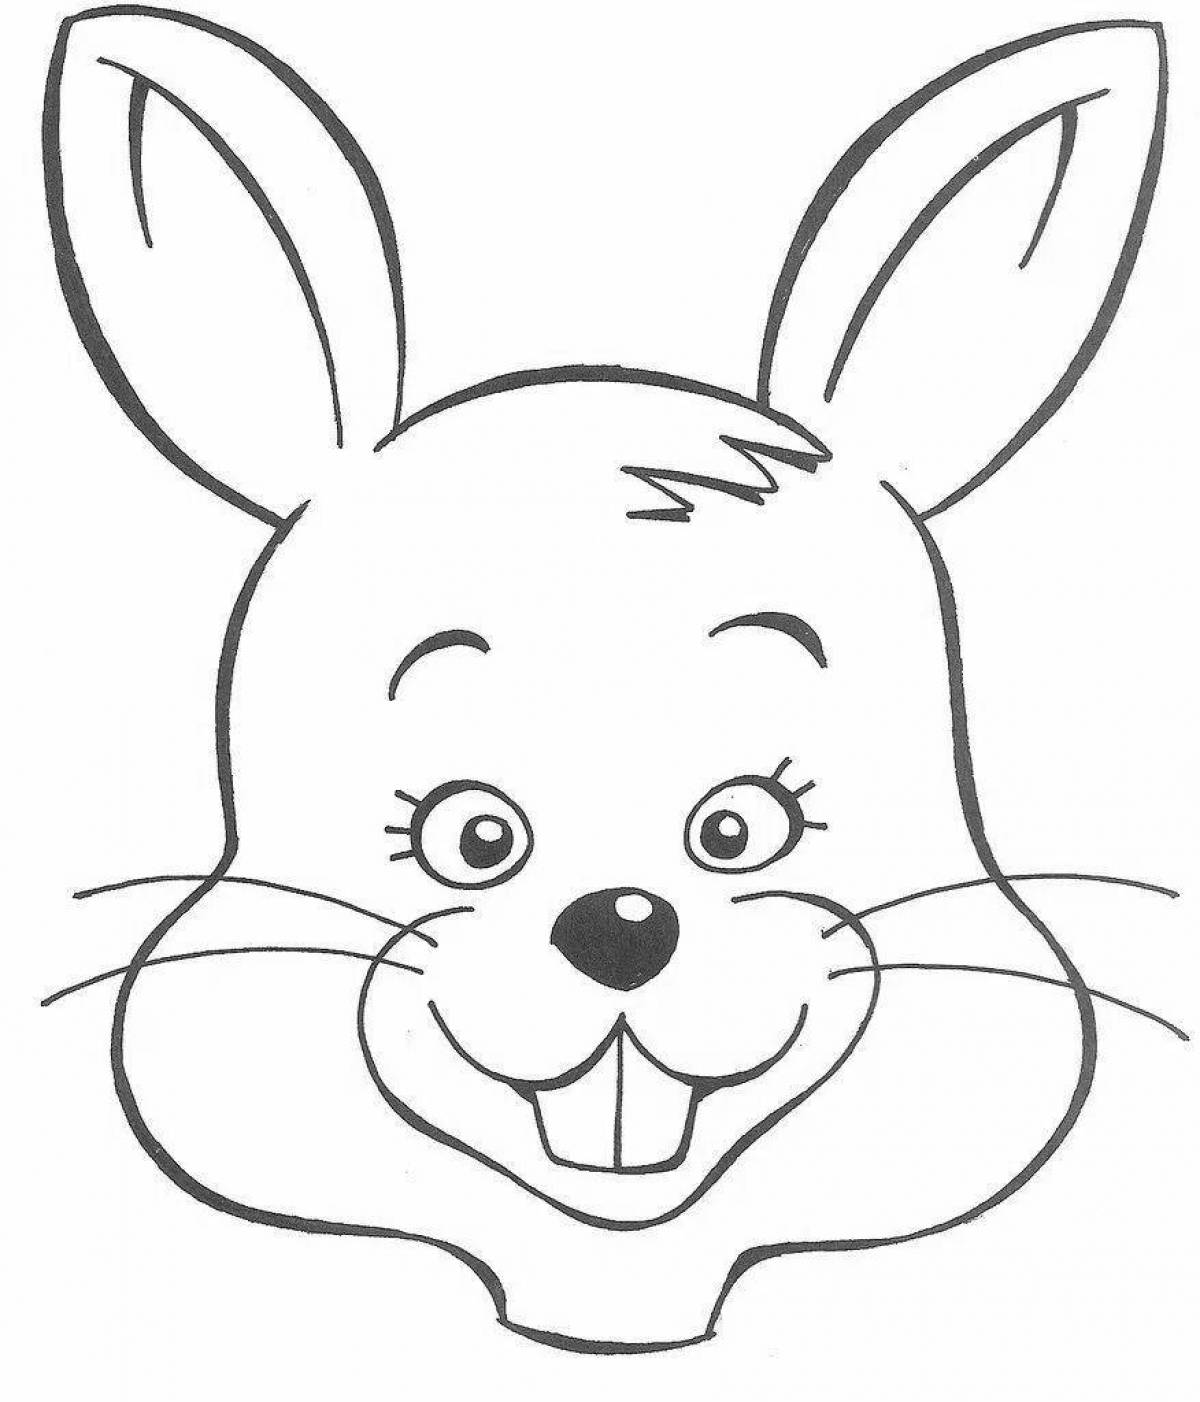 Coloring book magical muzzle of a hare